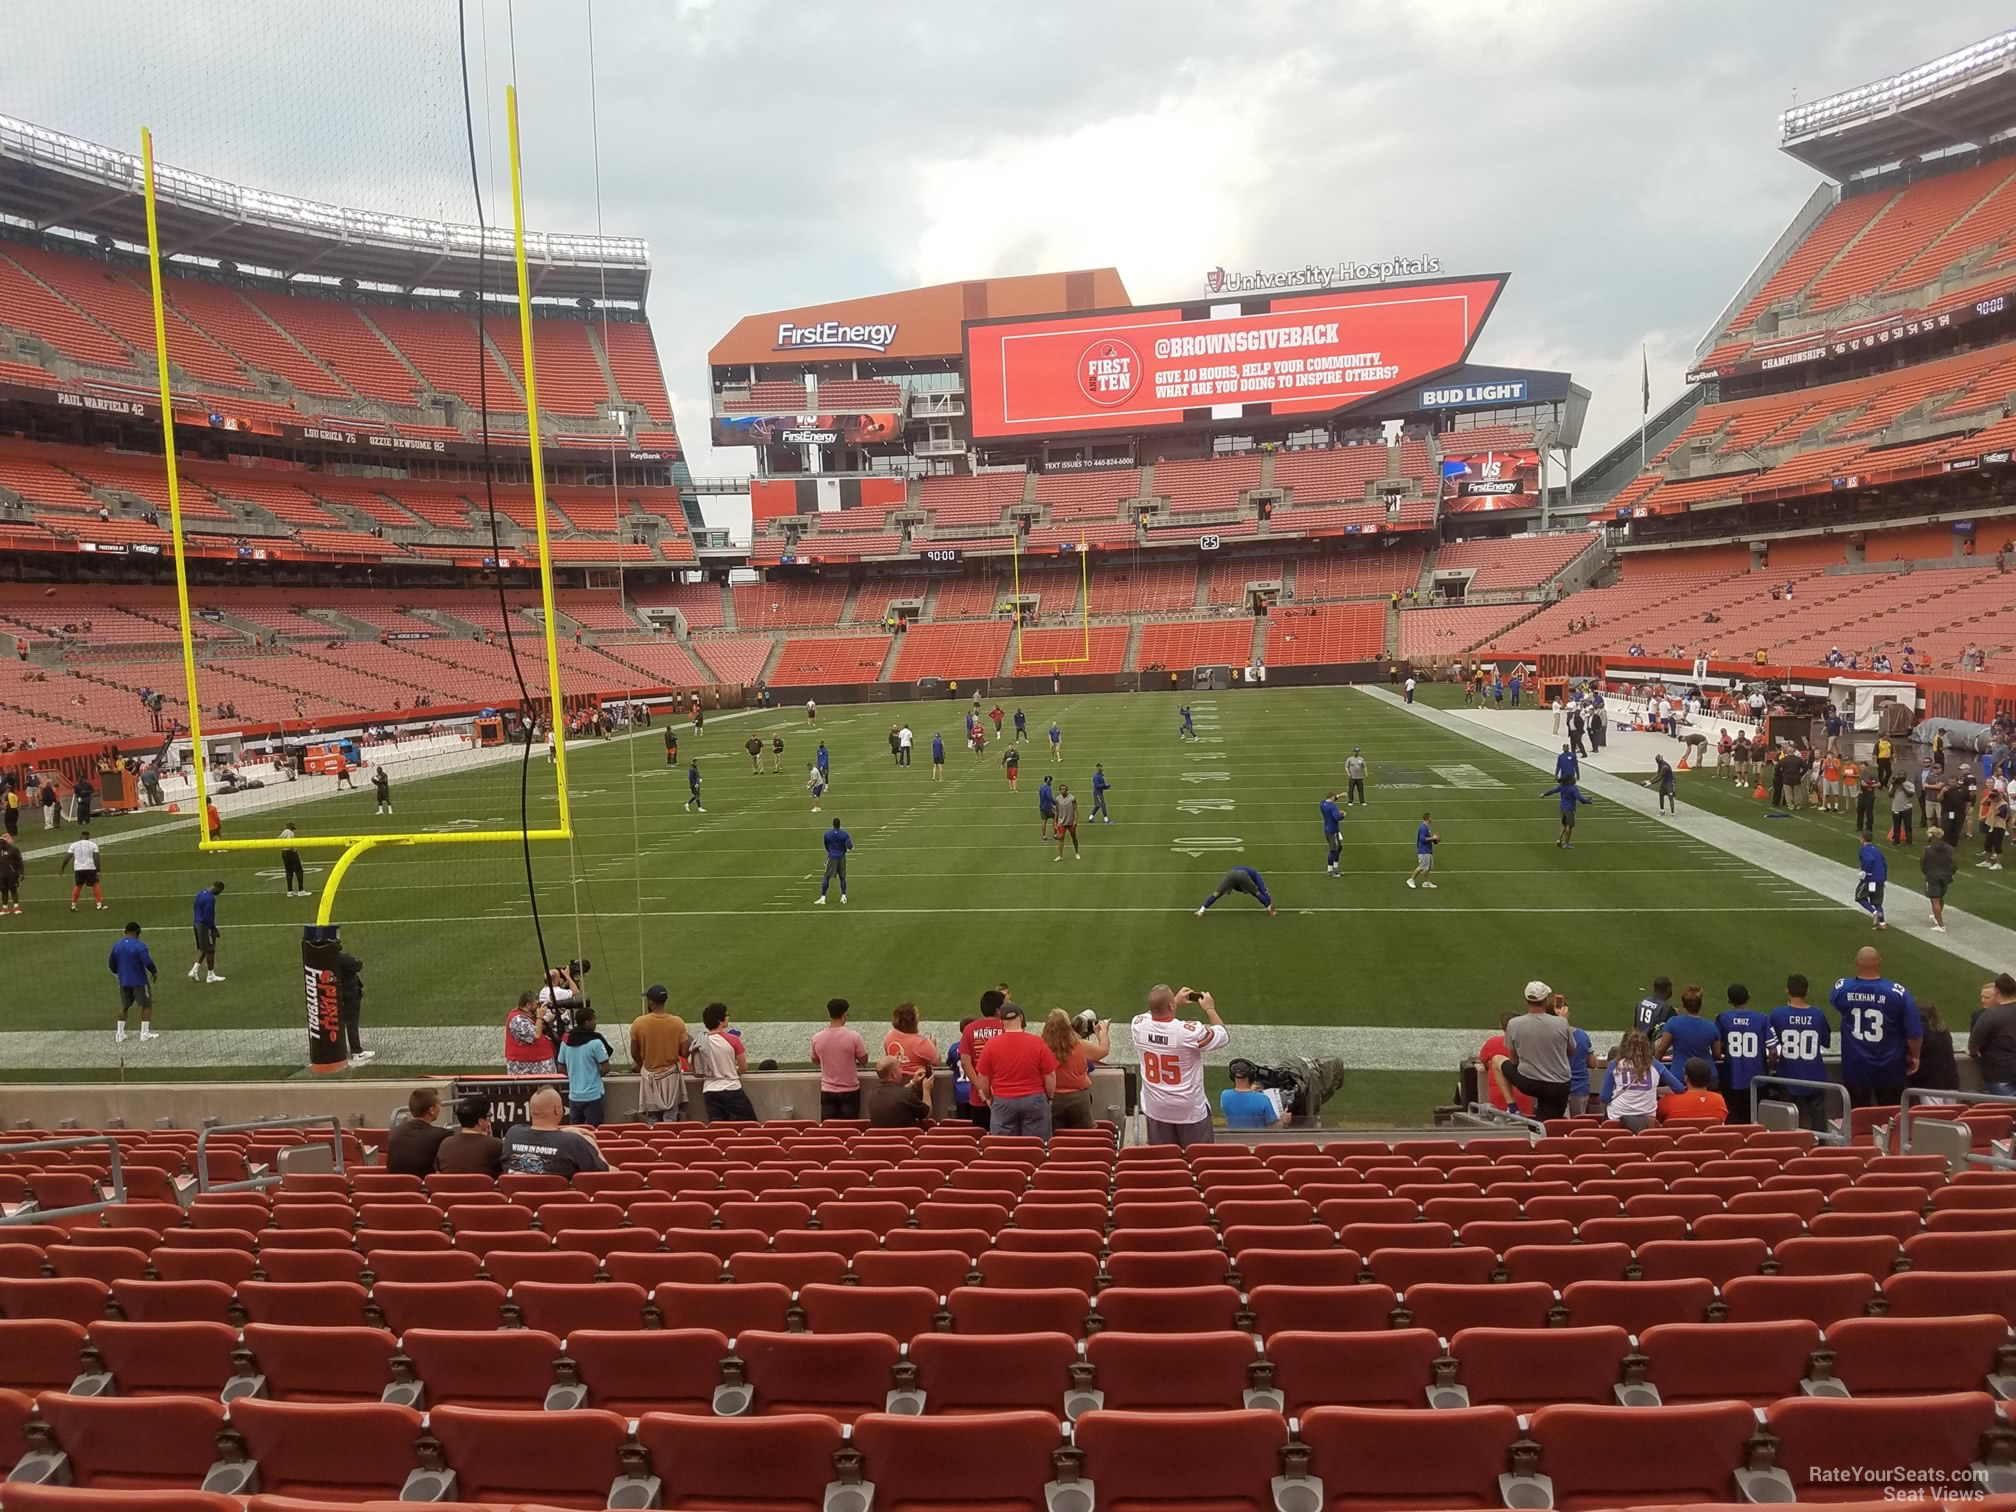 section 148, row 17 seat view  - cleveland browns stadium